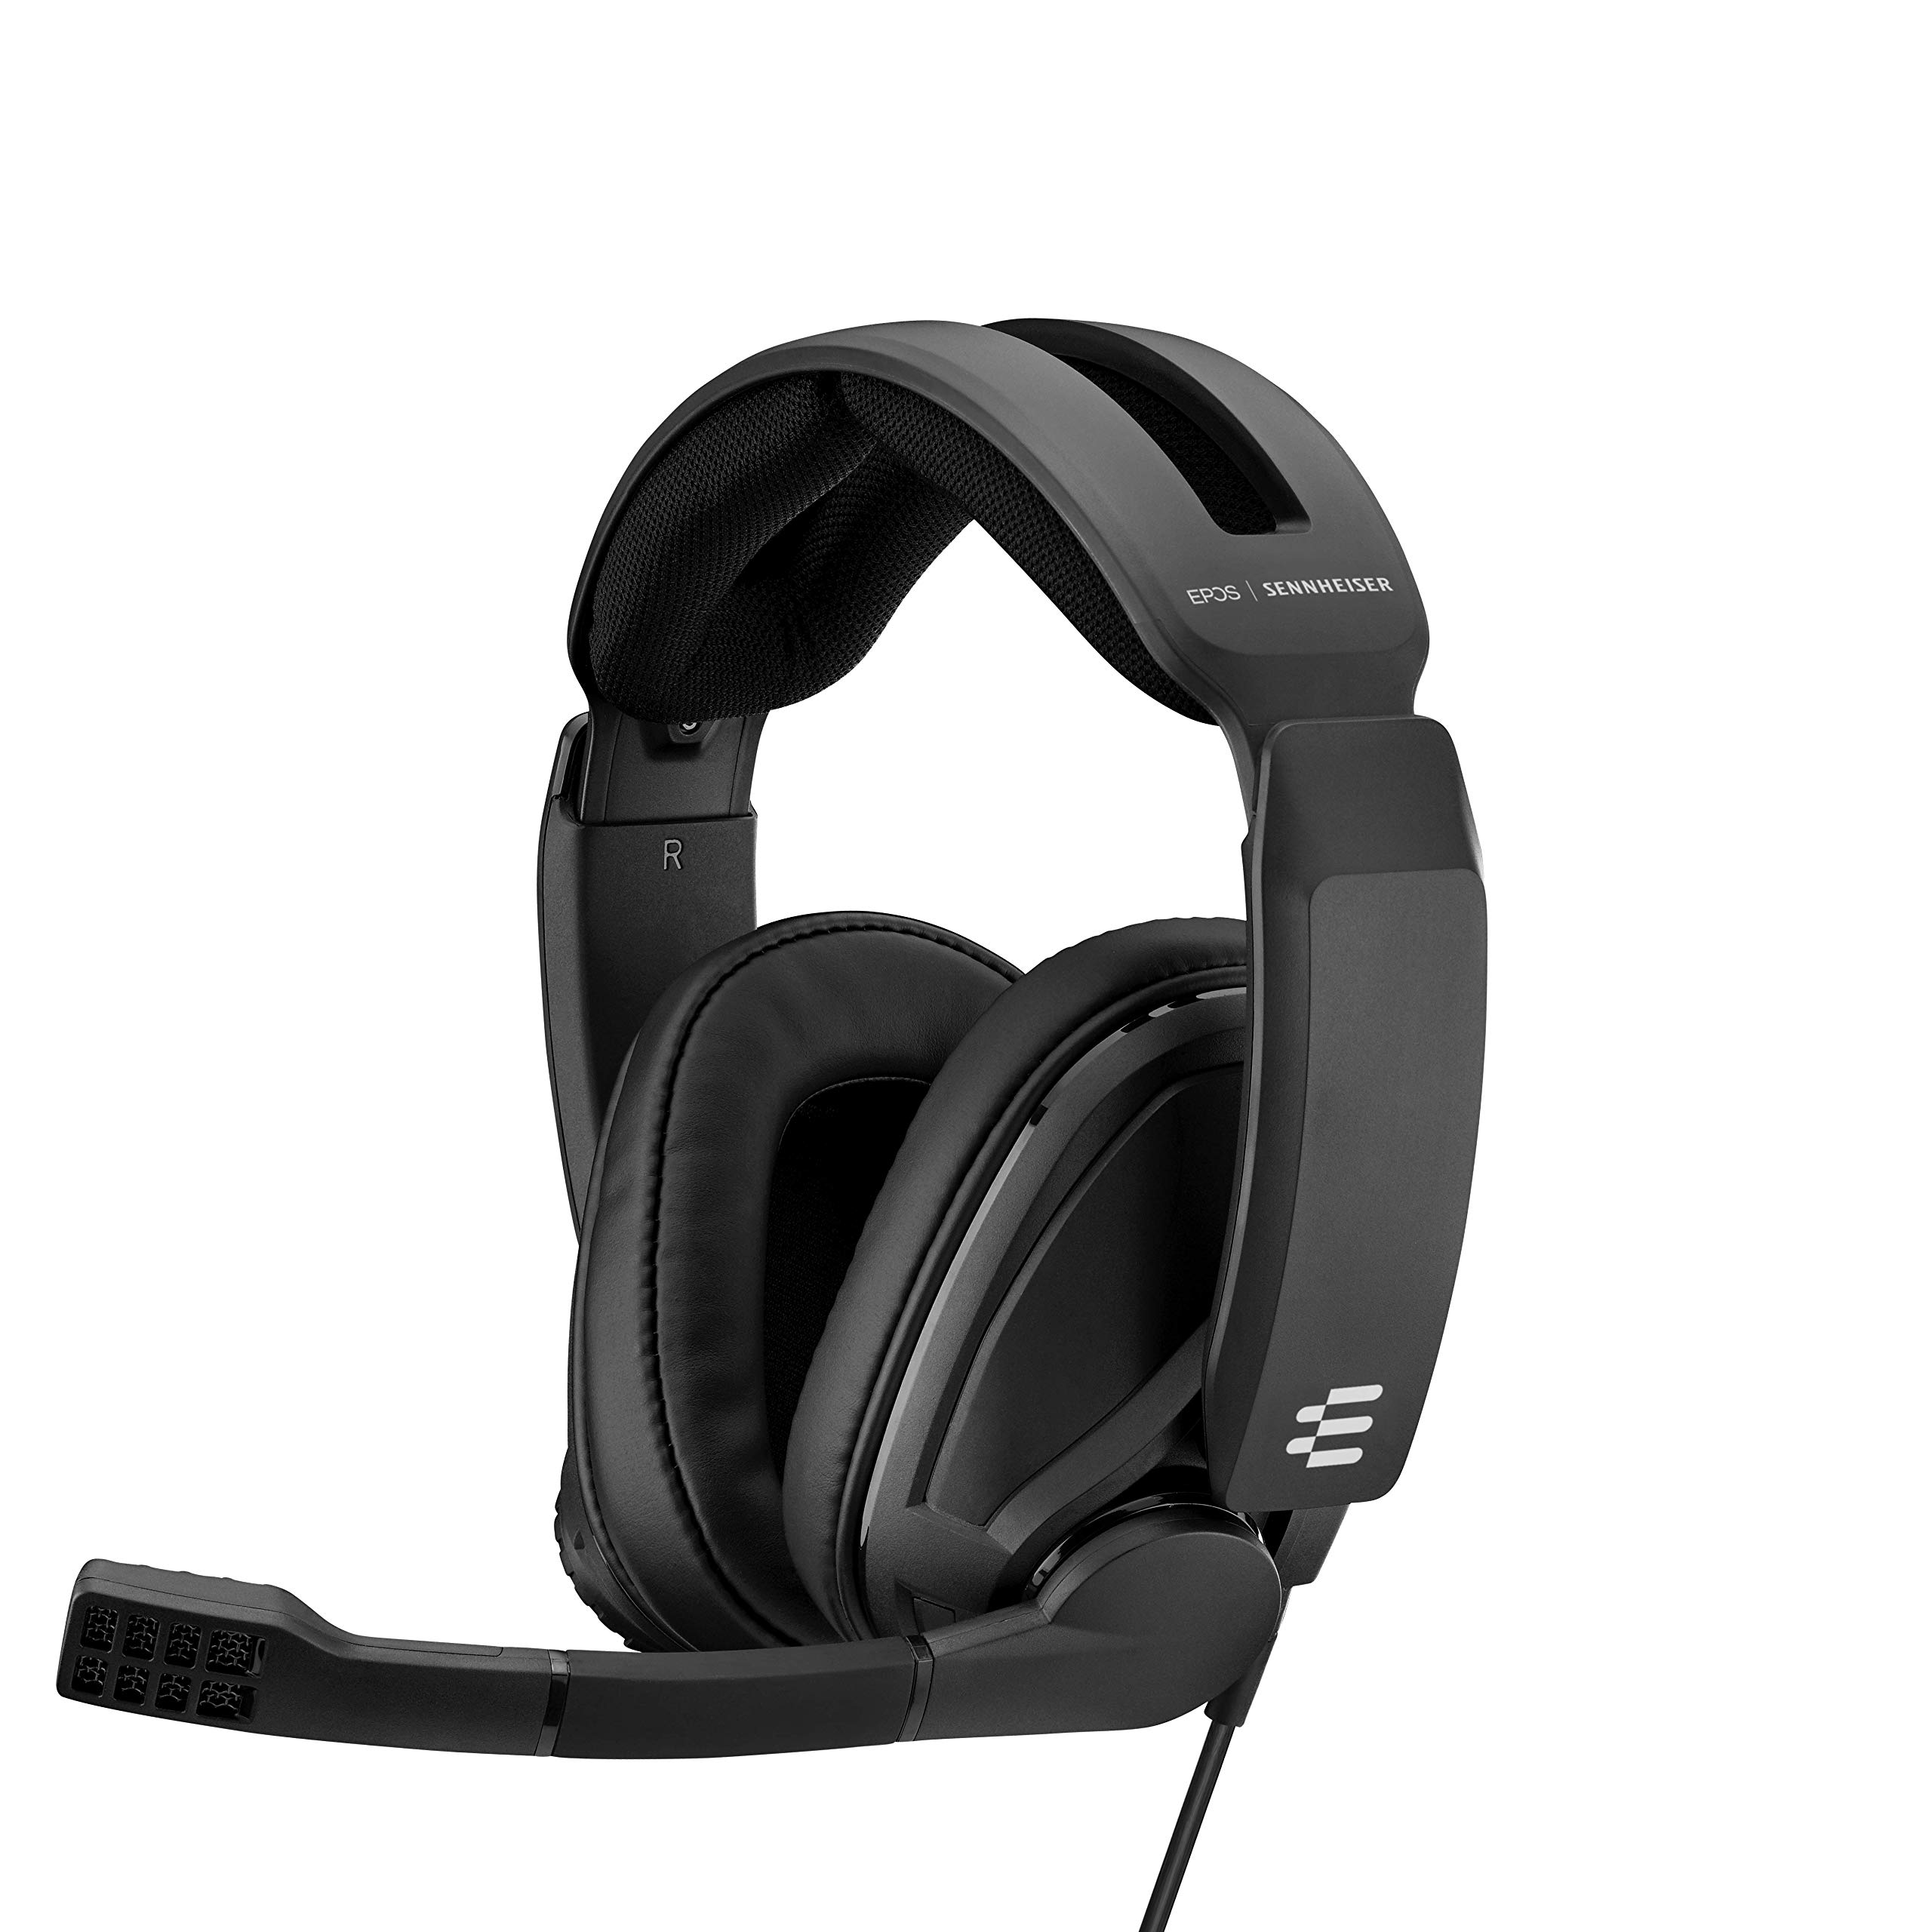 Sennheiser GSP 302 Closed Back Gaming Headset for PC, Mac, PS4 and Xbox One - Black (Renewed)